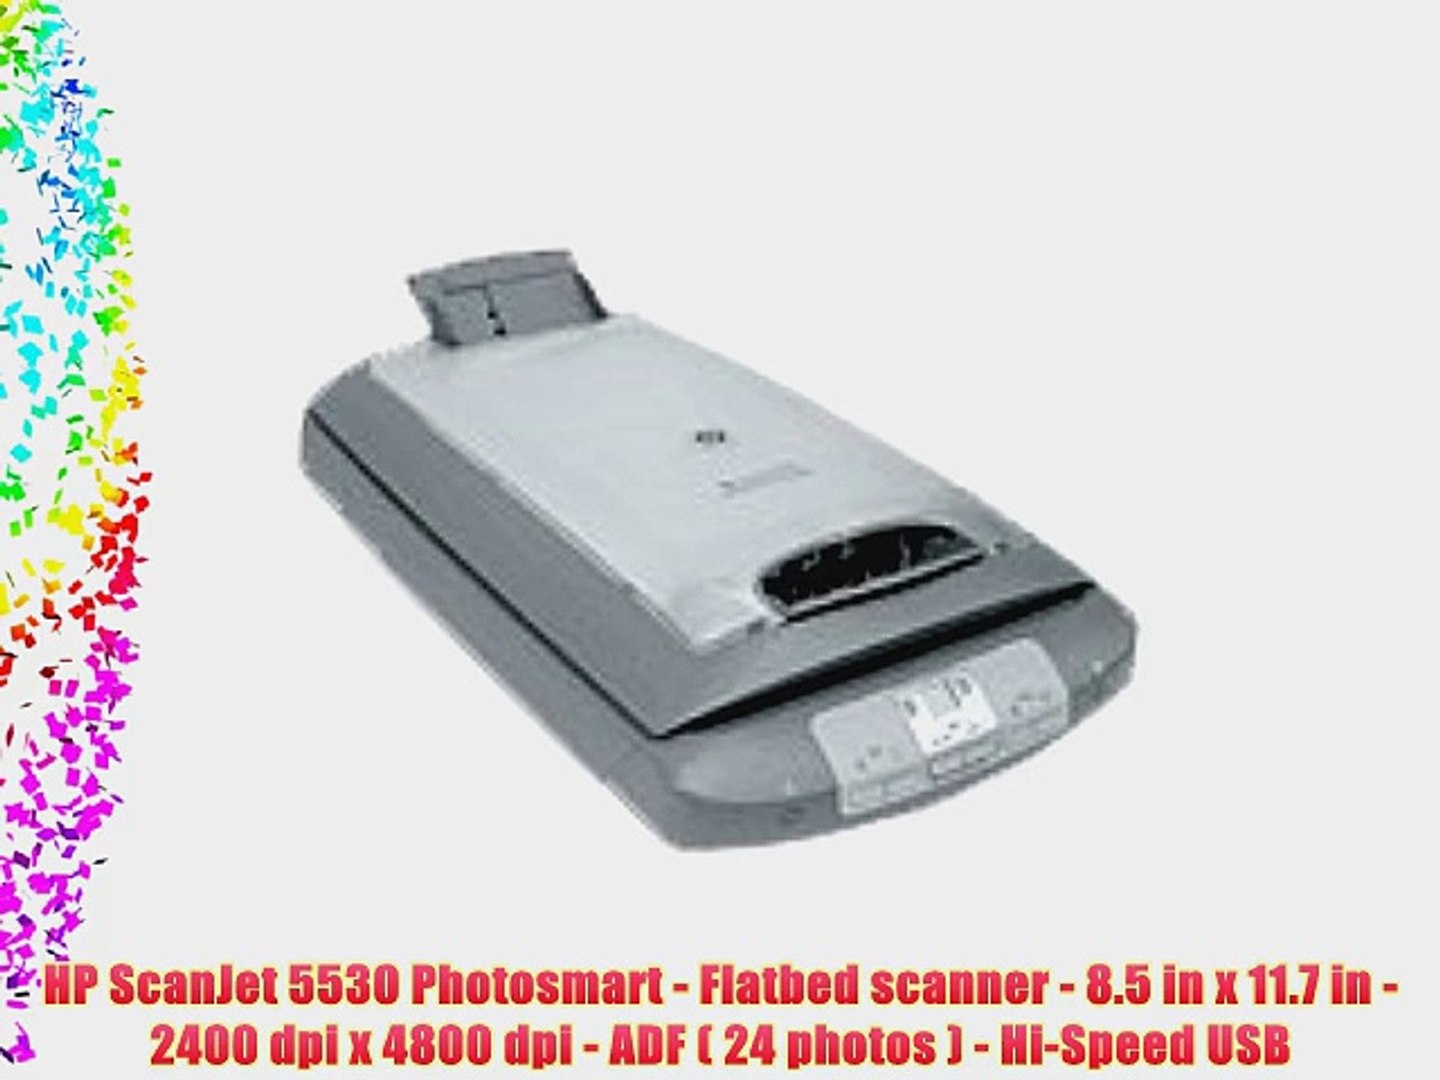 HP ScanJet 5530 Photosmart - Flatbed scanner - 8.5 in x 11.7 in - 2400 dpi  x 4800 dpi - ADF - video Dailymotion